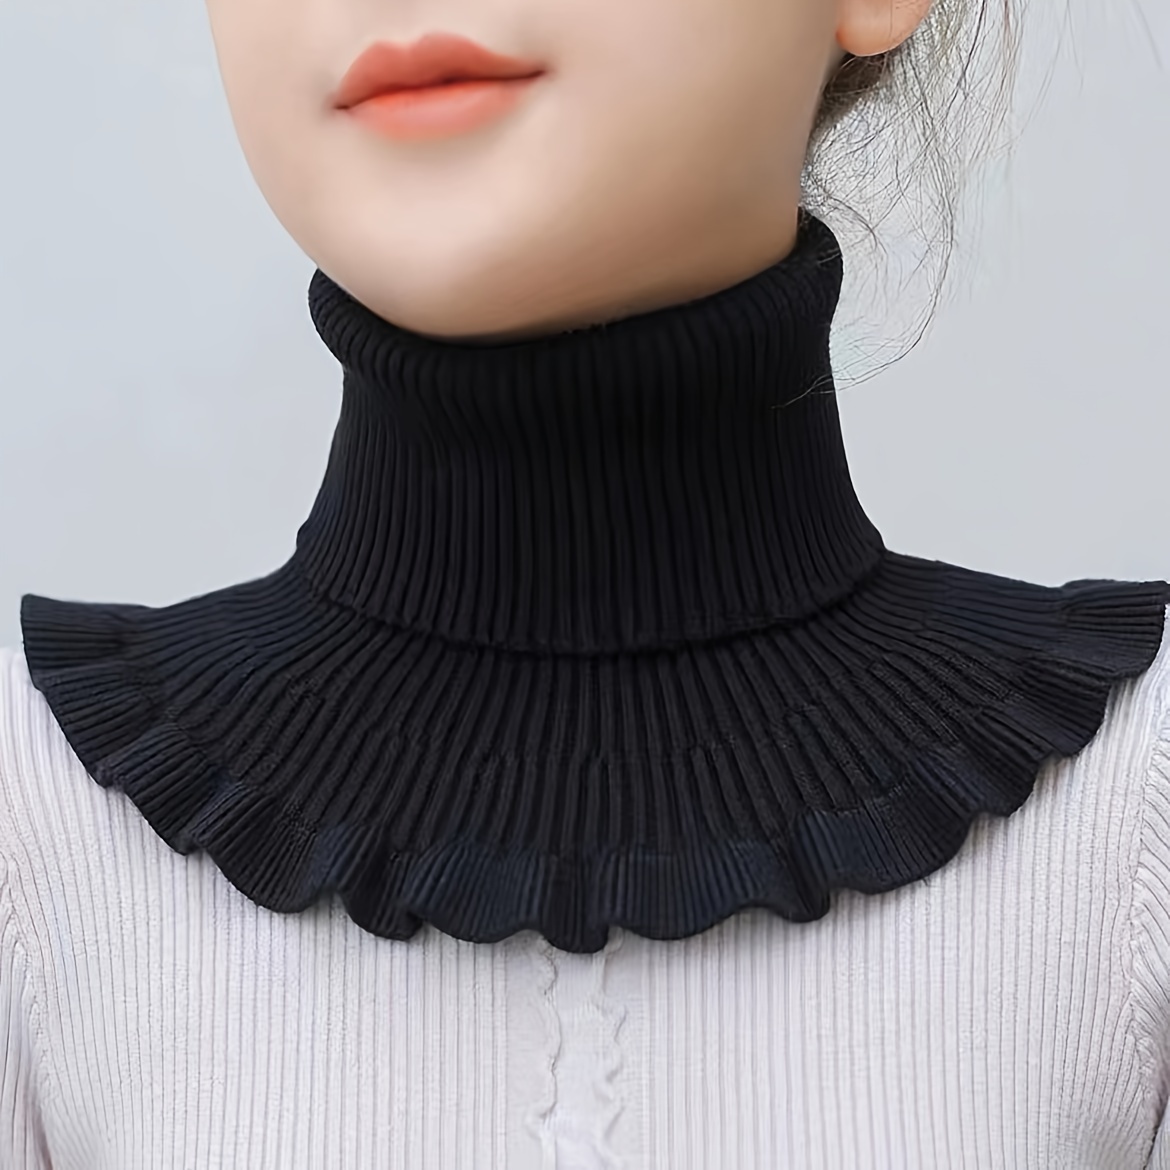 

Hand Knitted Fake Collar Detachable High Collars Turtleneck Dickey Collar For Women